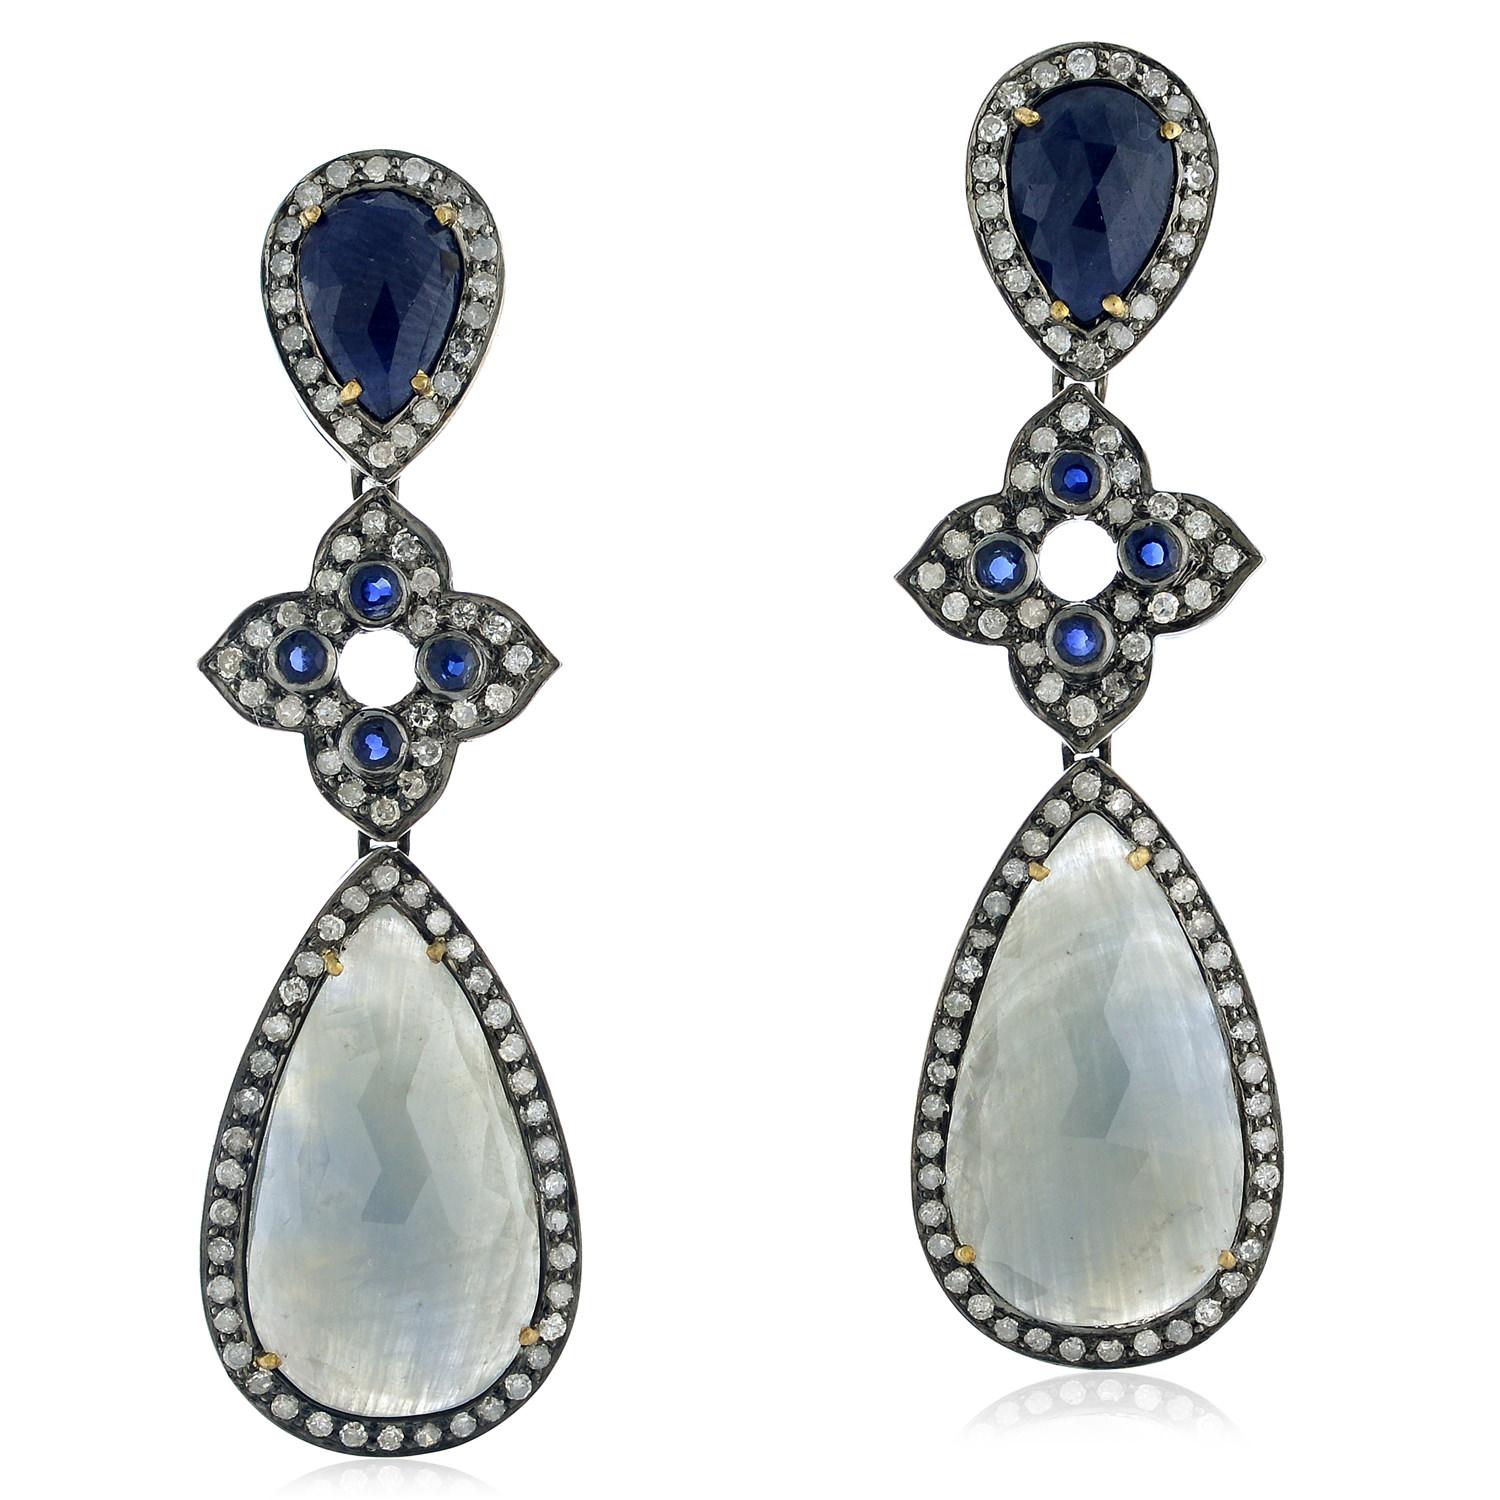 Pear Cut Two-Tier Sapphire Dangle Earring with Diamond Motif in 18k Gold and Silver